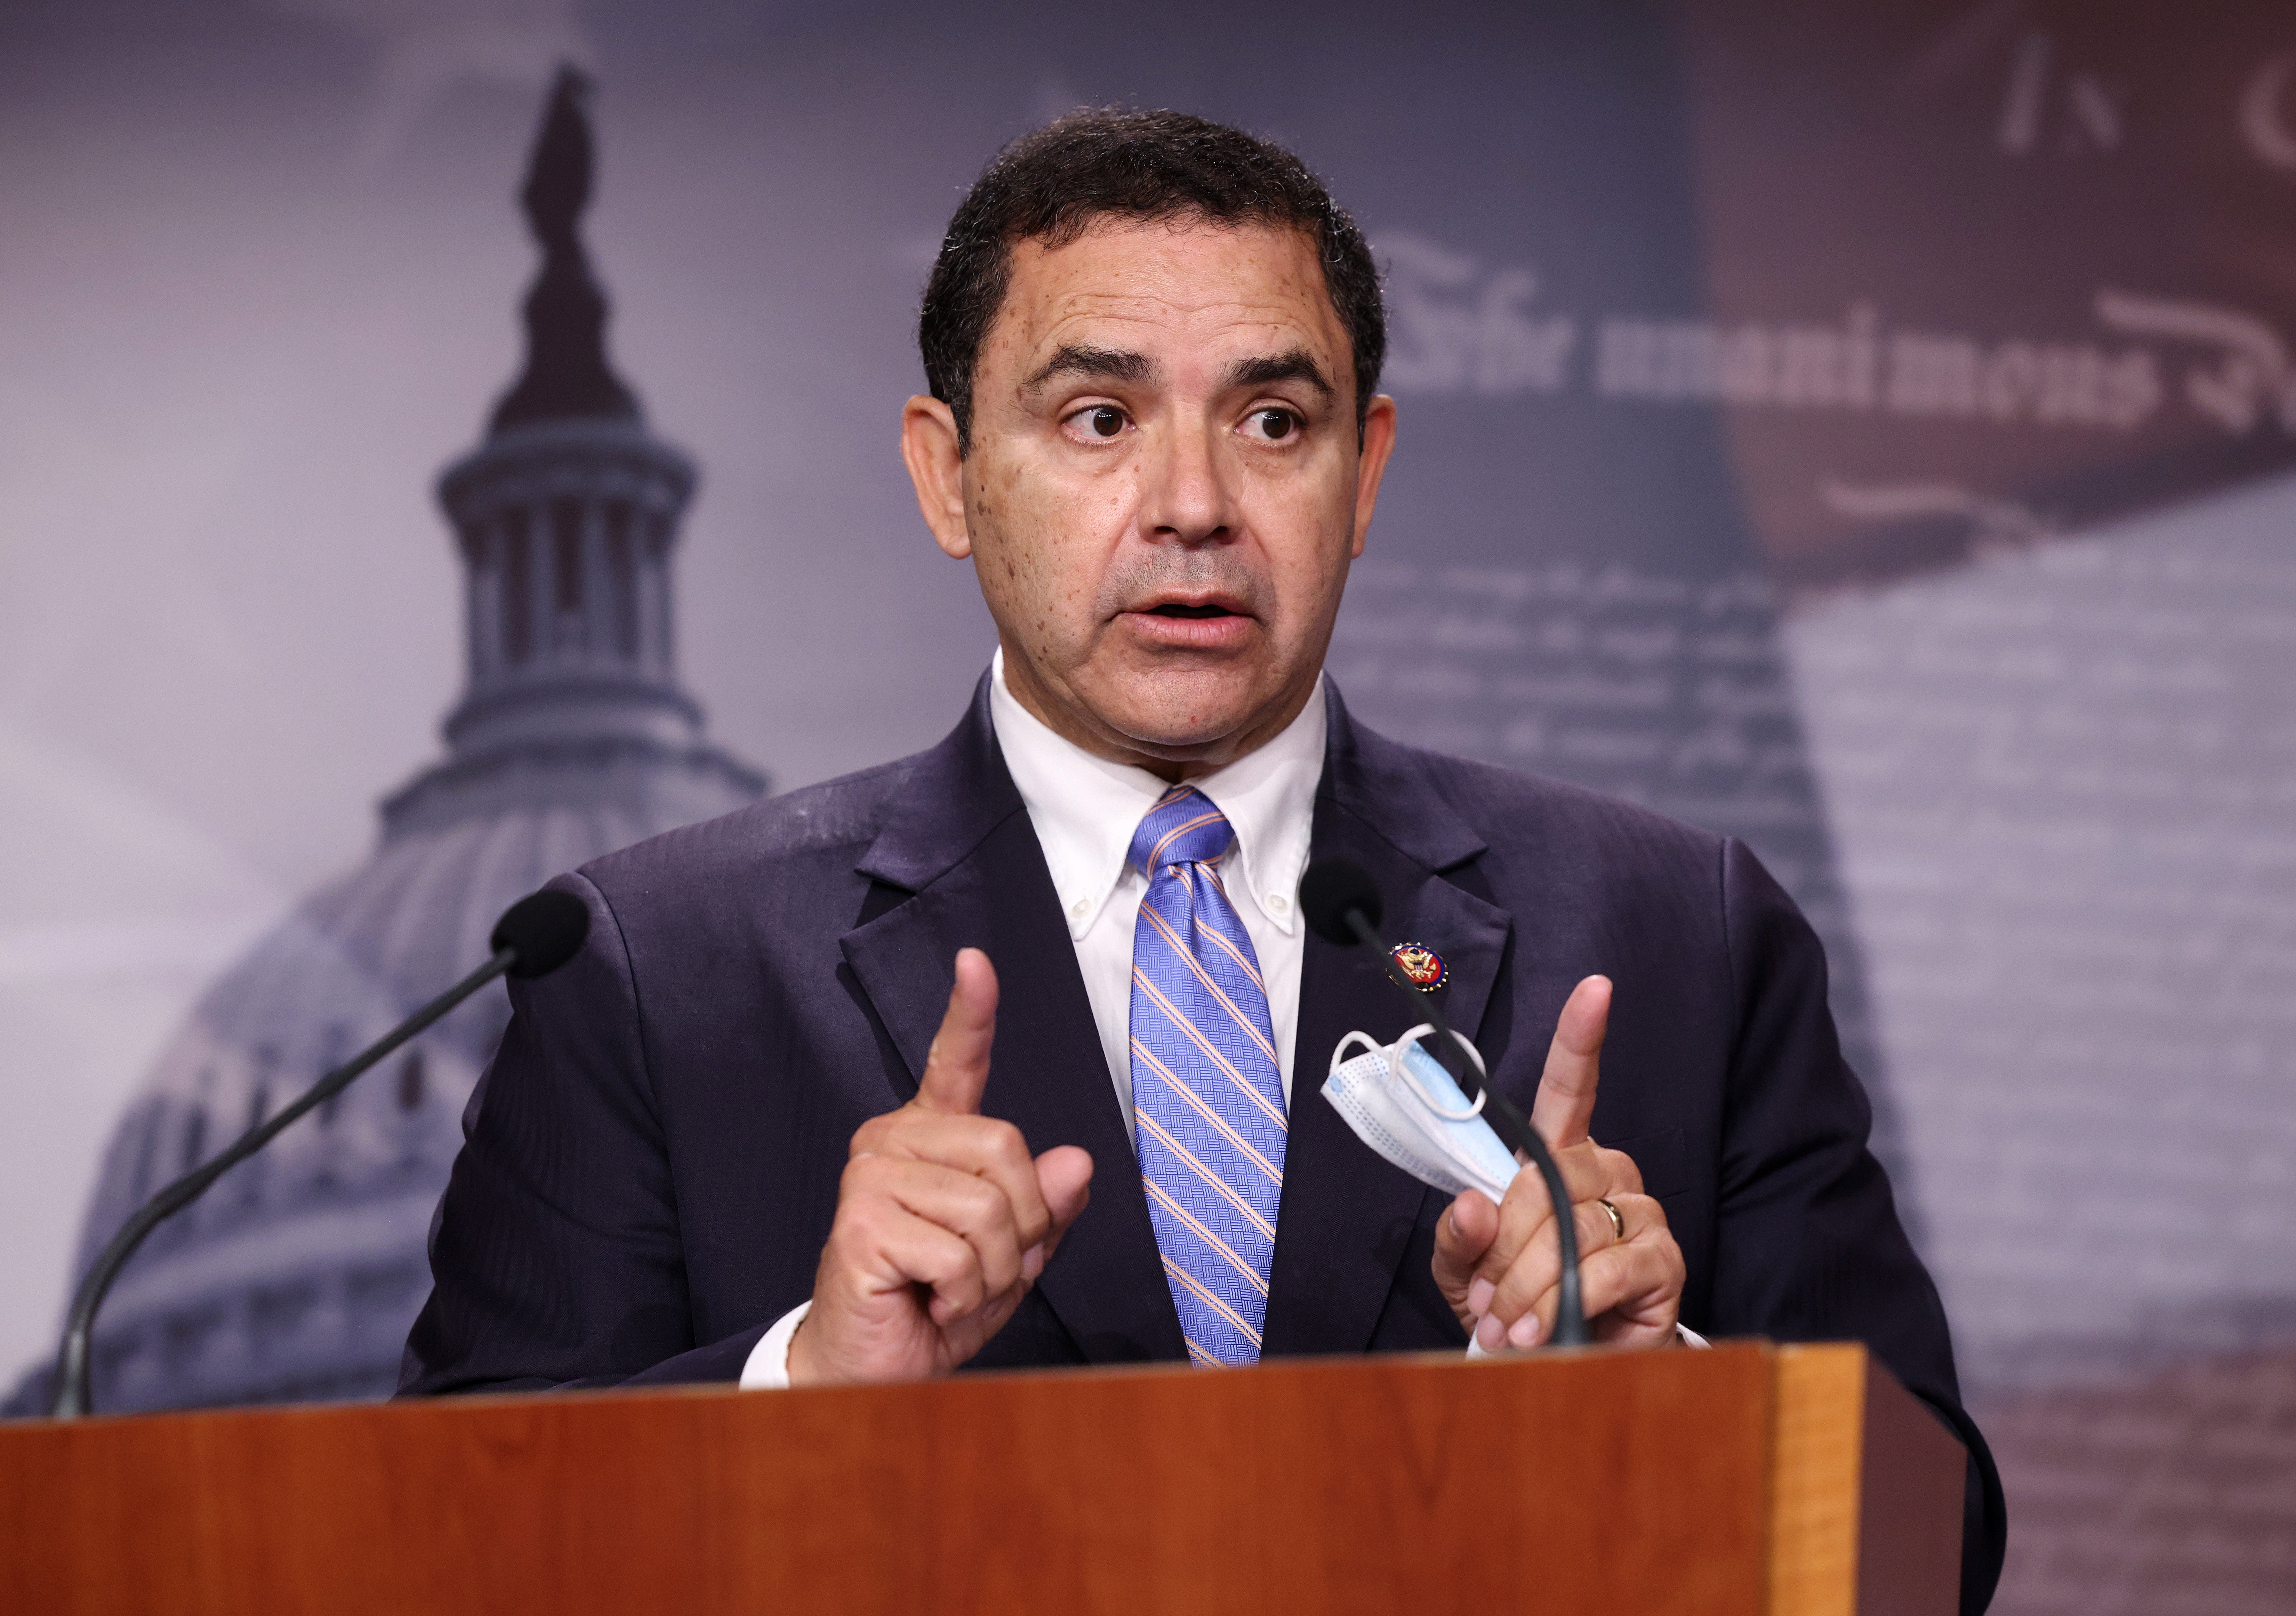 U.S. Rep. Henry Cuellar (D-TX) speaks on southern border security and illegal immigration, during a news conference at the U.S. Capitol on July 30, 2021 in Washington, DC